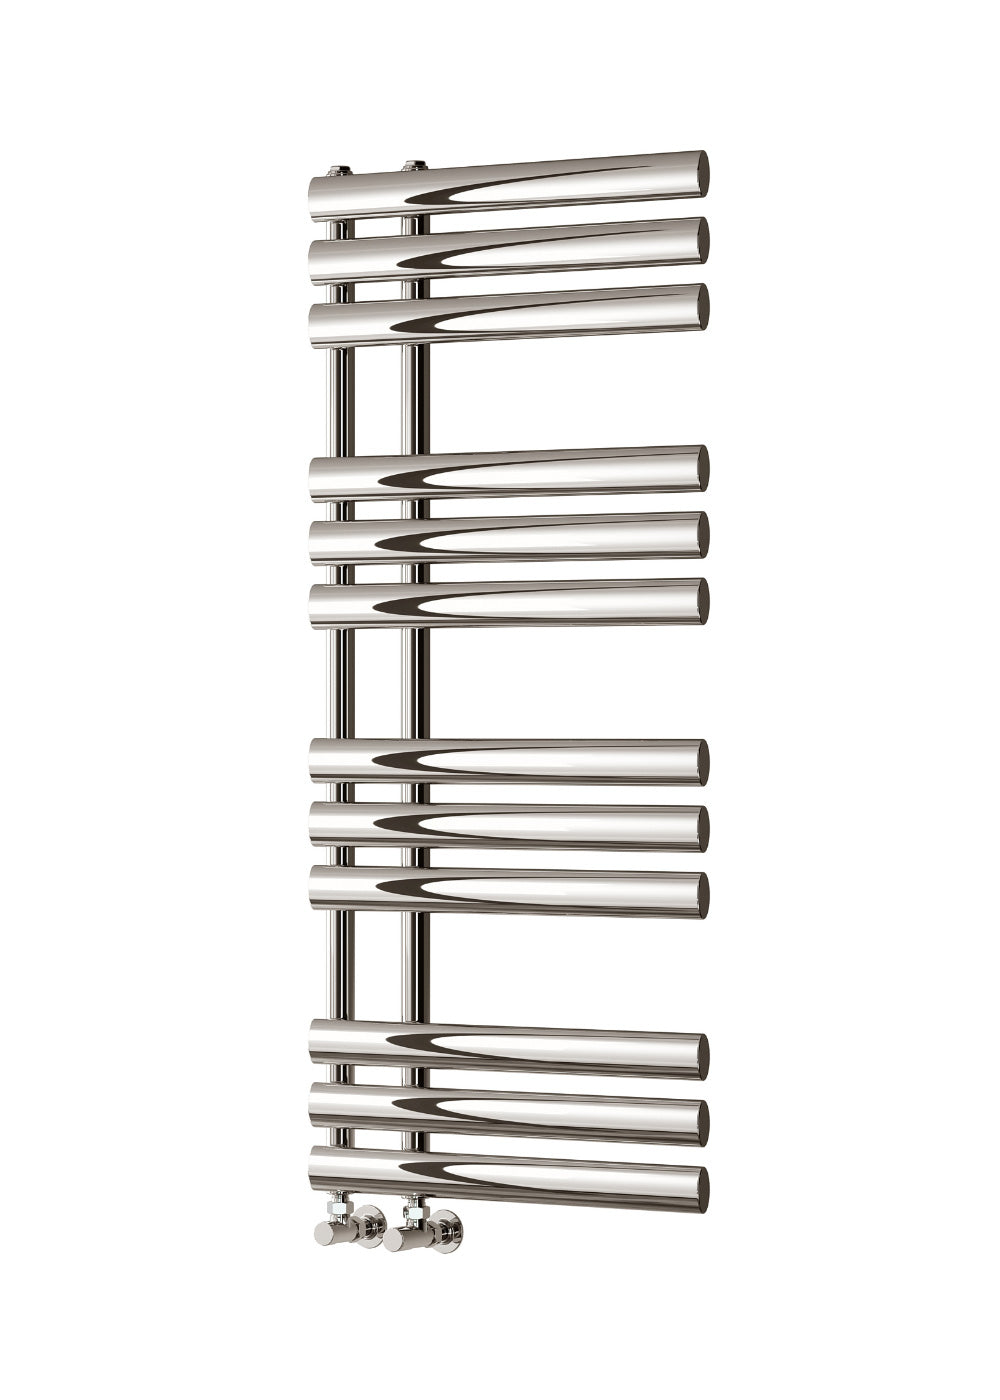 Chisa Electric Heated Towel Rail - Various Sizes - Chrome